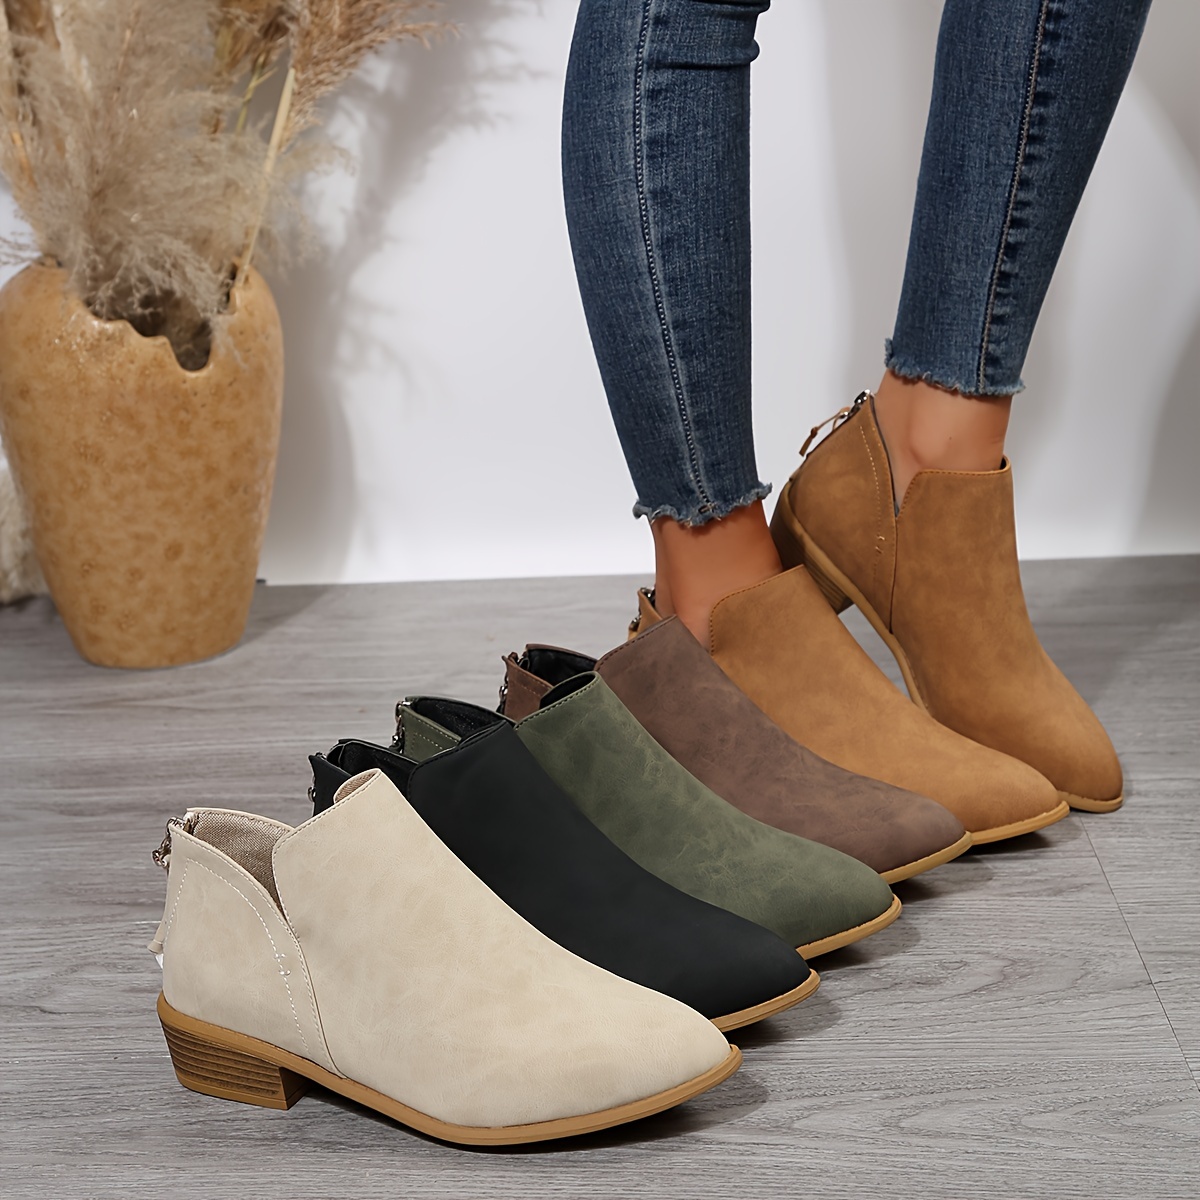 Women's Solid Color Block Heeled Boots, Elegant Lace Up Short Boots,  Stylish Side Zipper Ankle Boots